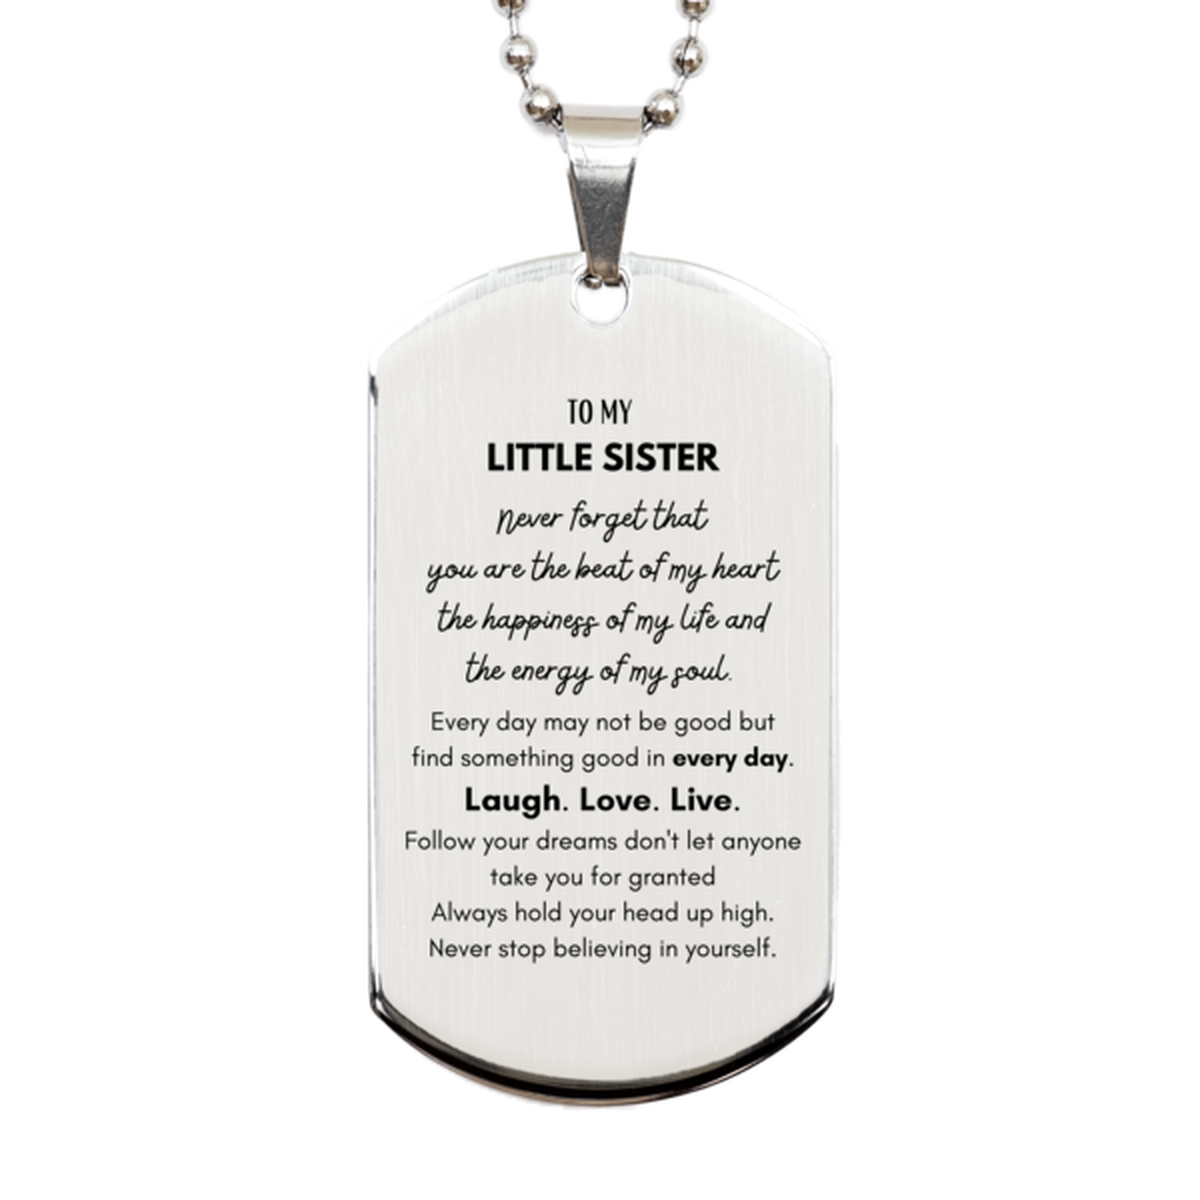 To My Little Sister Dogtag Gifts, Christmas Little Sister Silver Dog Tag Present, Birthday Unique Motivational For Little Sister, To My Little Sister Never forget that you are the beat of my heart the happiness of my life and the energy of my soul